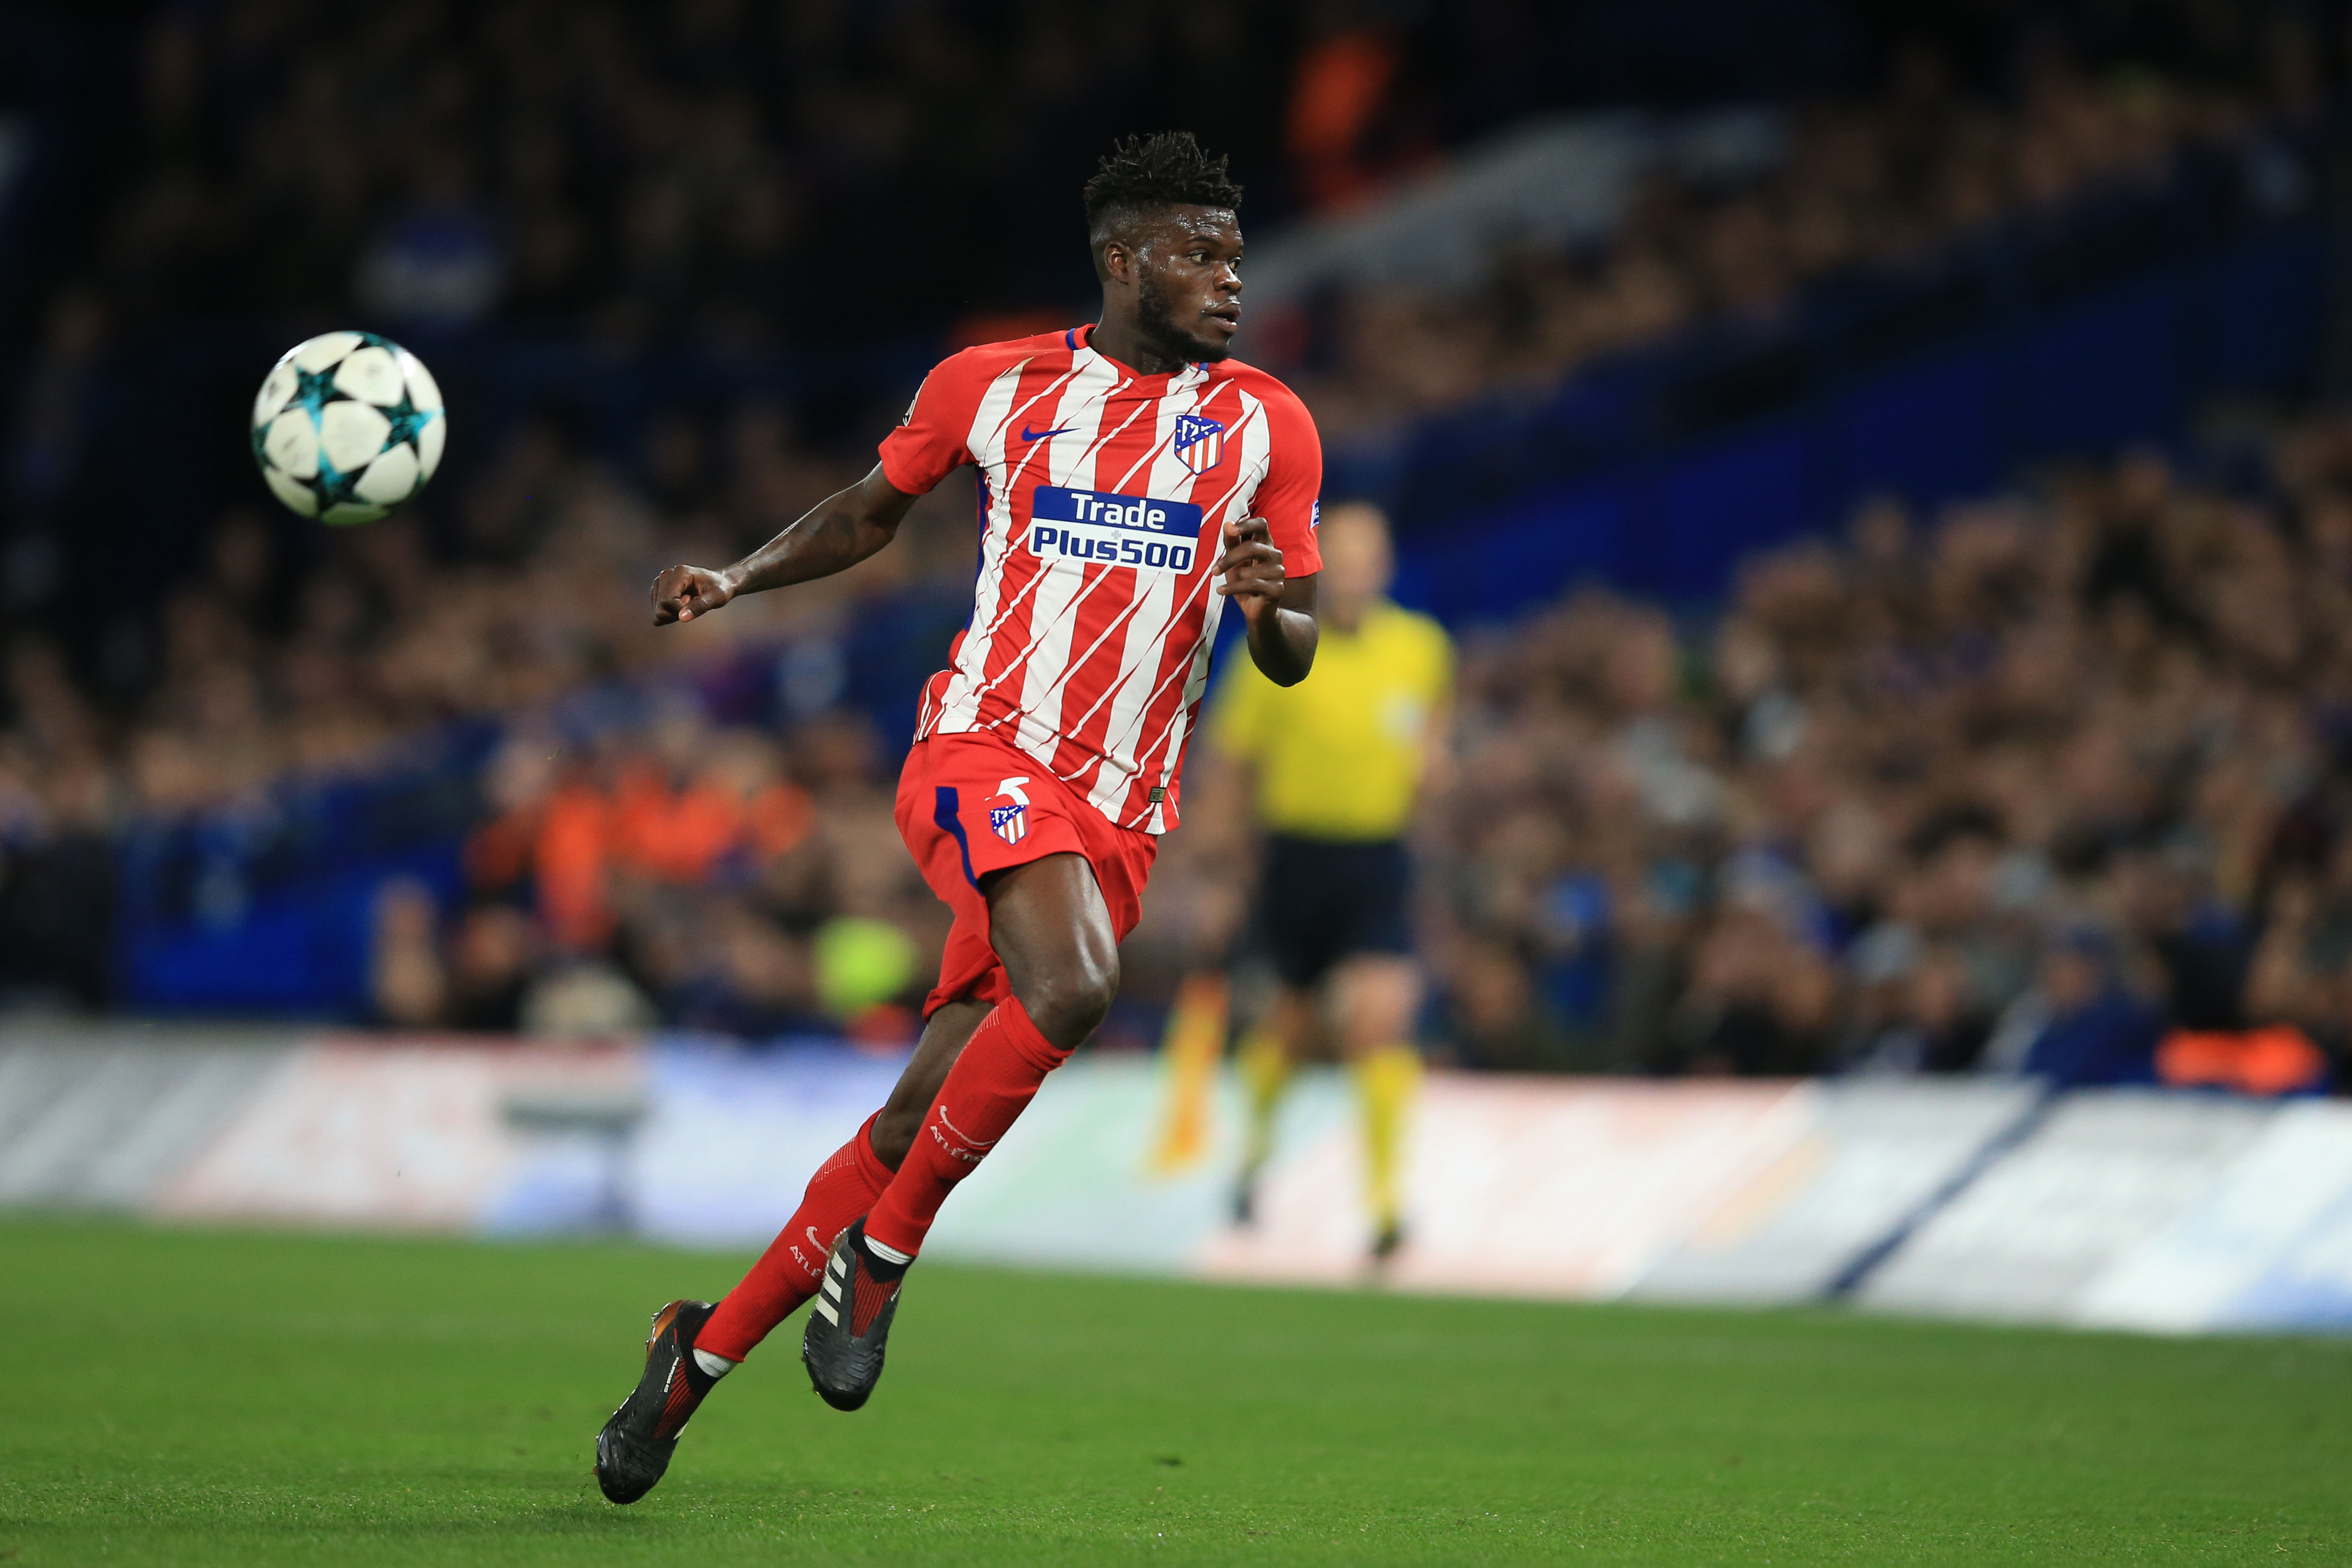 Arsenal sign Partey in £45m deadline day deal from Atletico Madrid